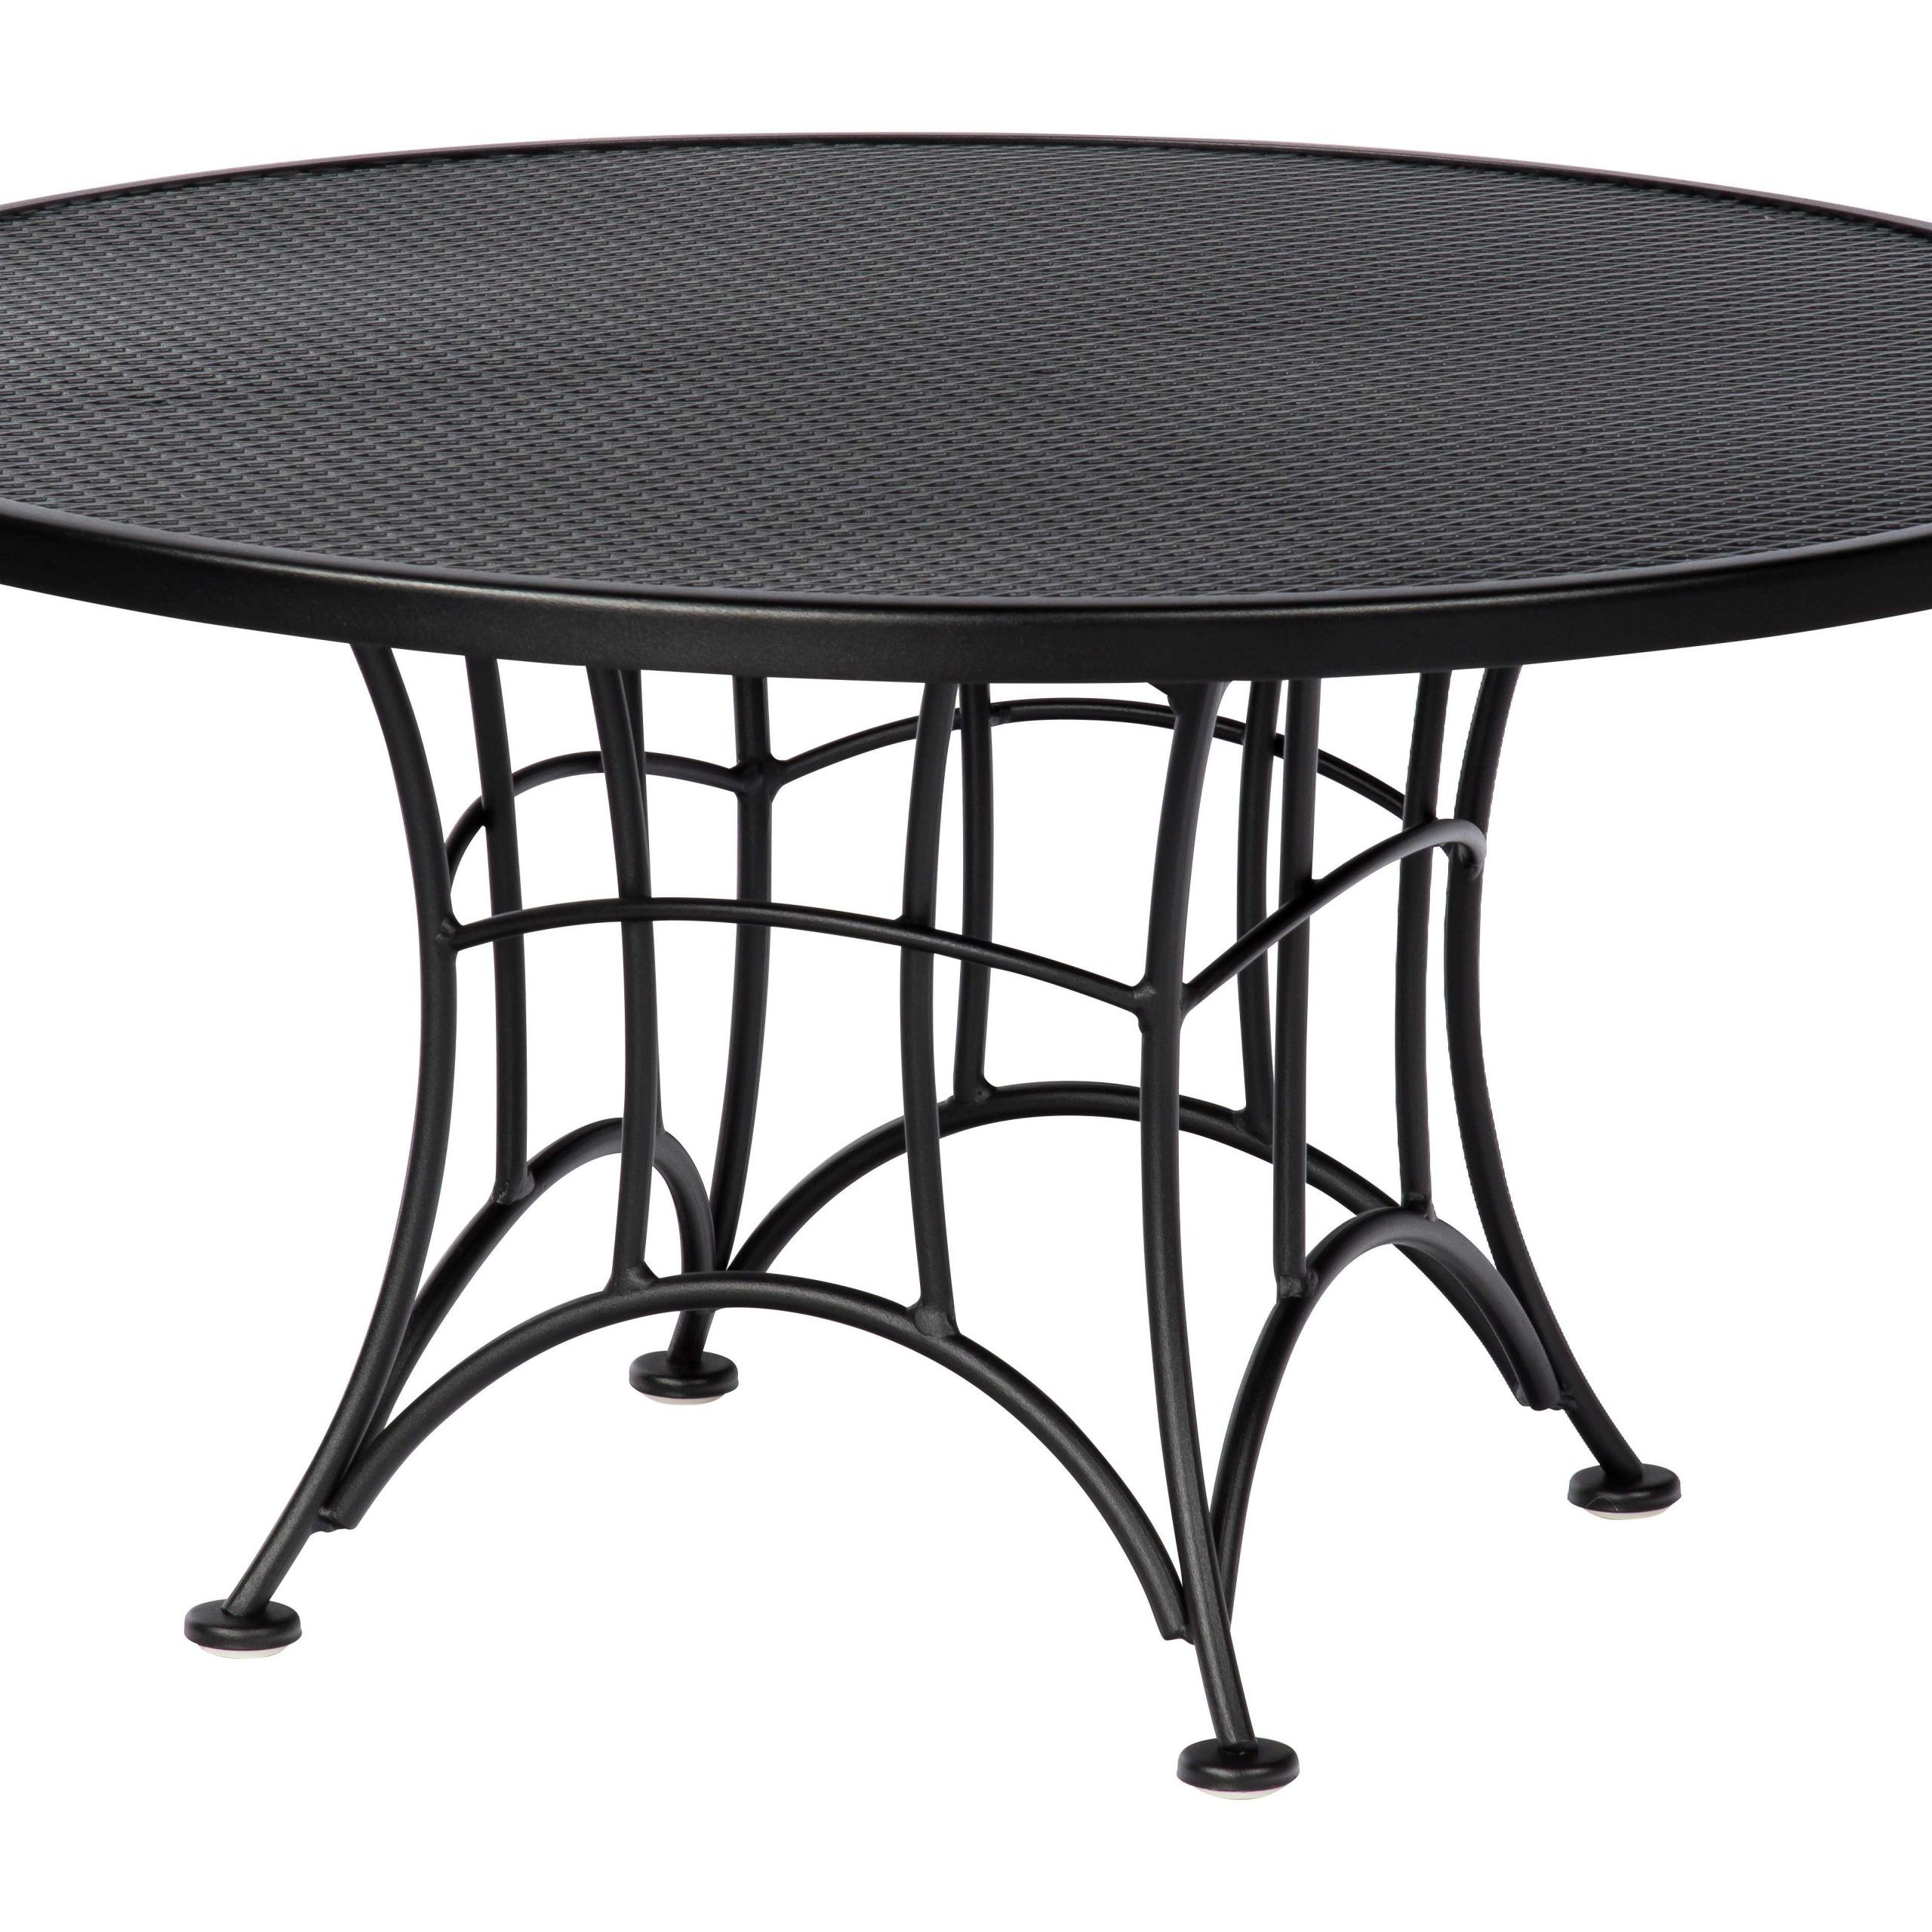 6k0038 With Regard To Widely Used Round Steel Patio Coffee Tables (View 8 of 15)